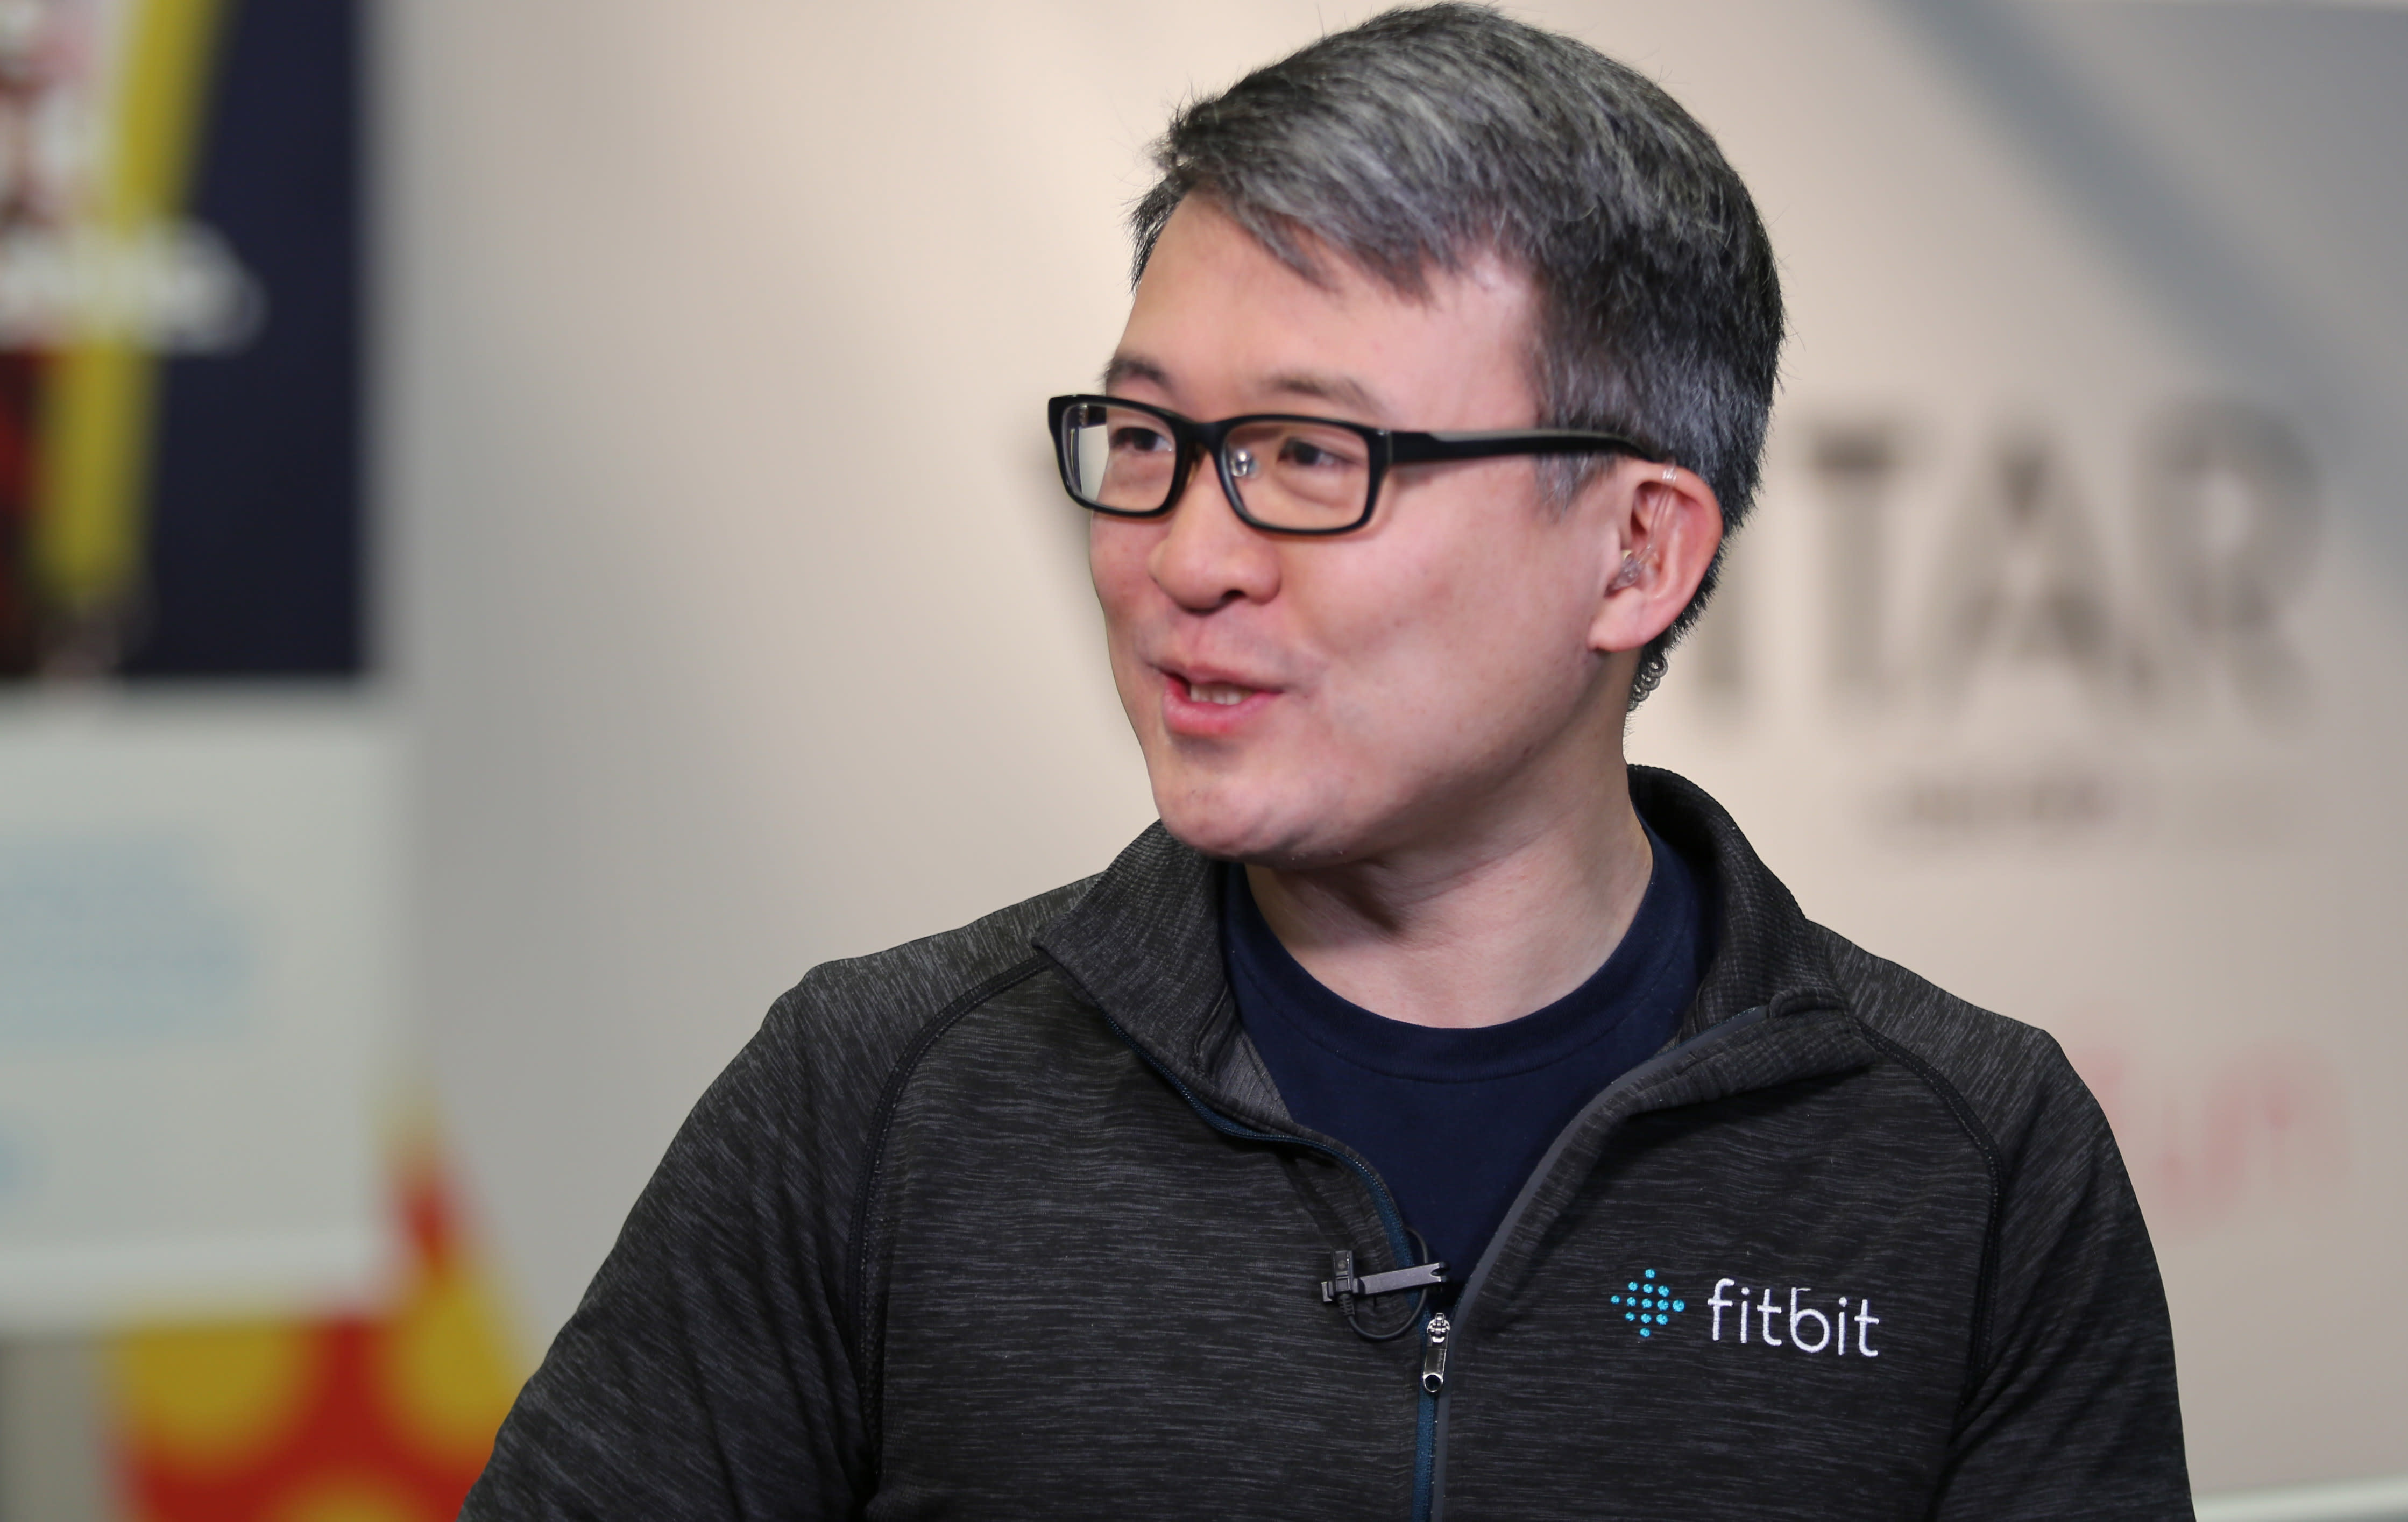 Fitbit CEO James Park: Innovation and 